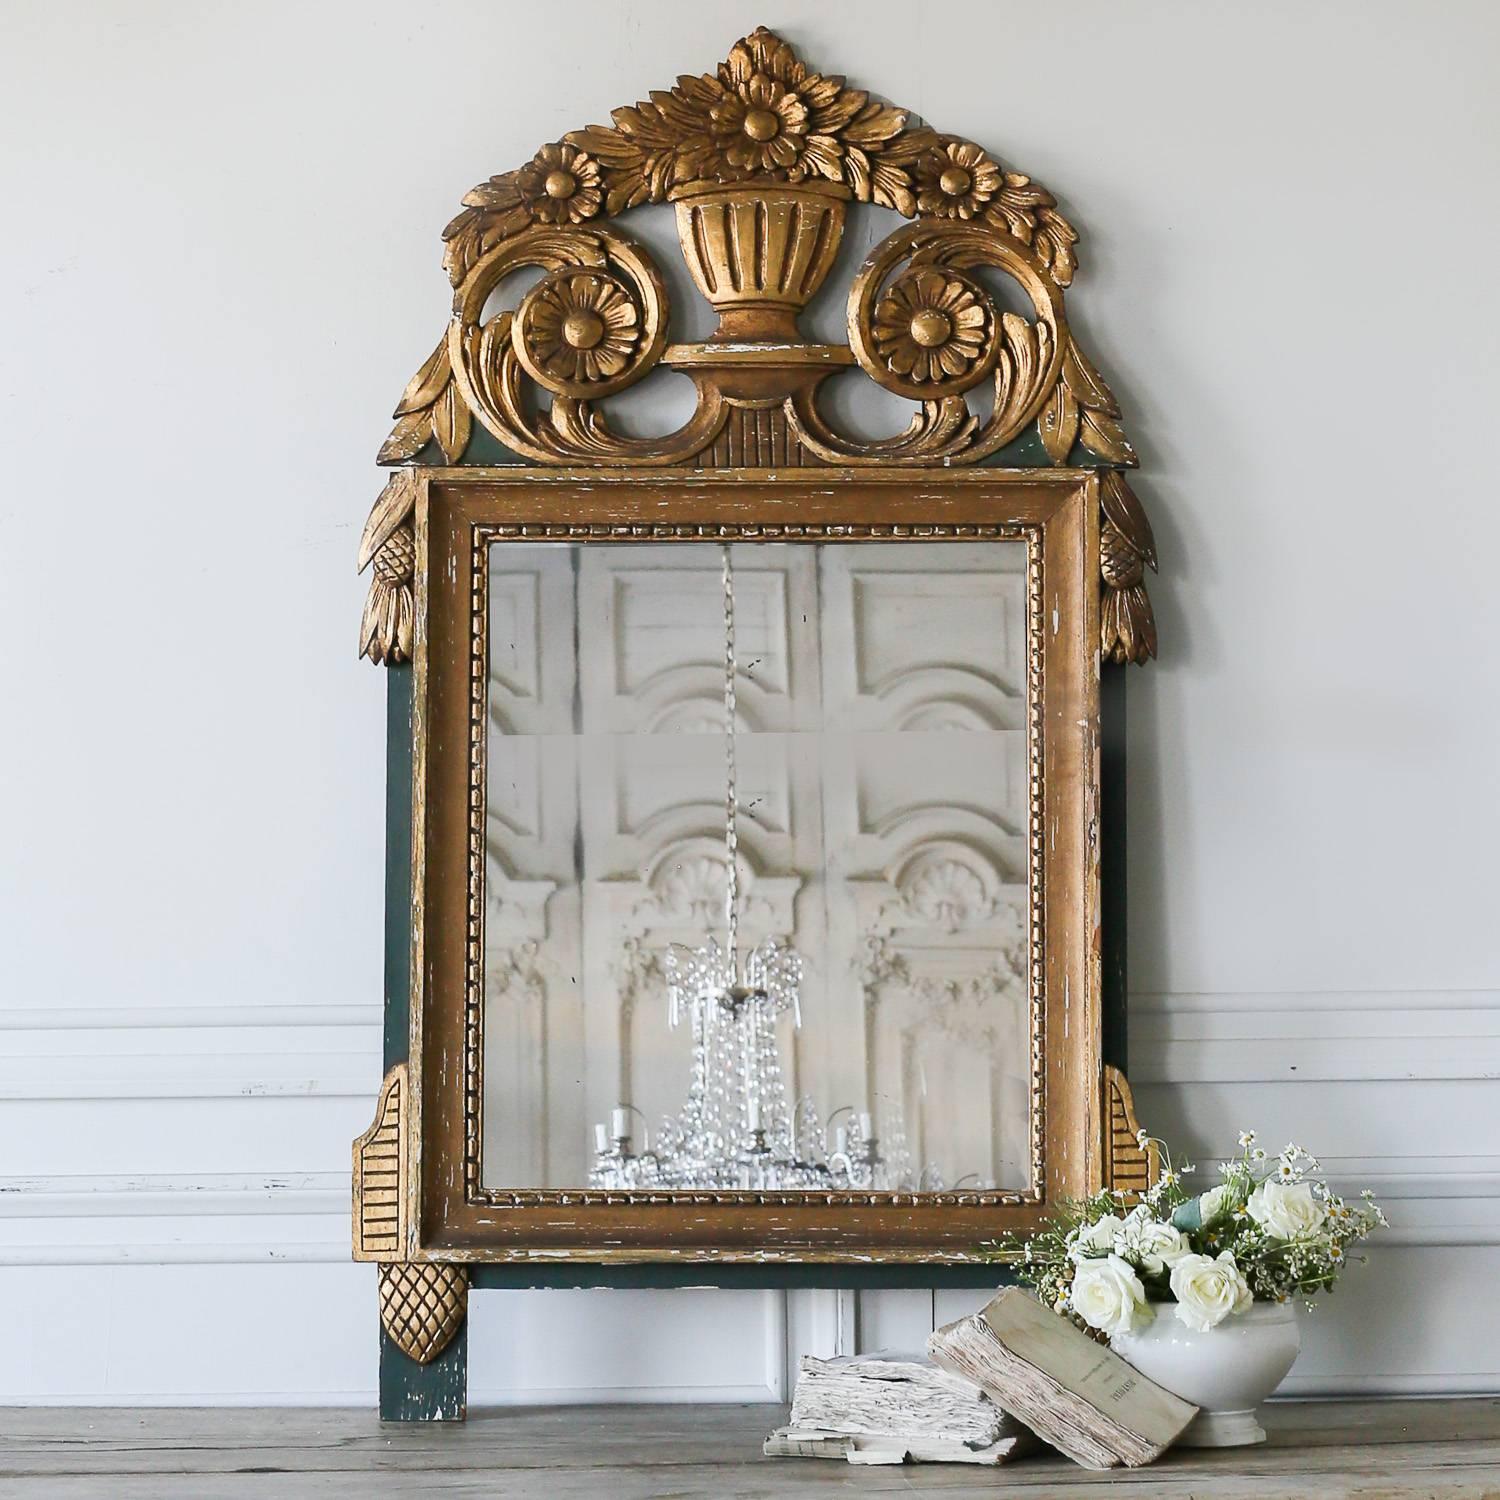 Petite vintage mirror in bright gilt against a forest green wash. The prominent crest features an urn with an intricate floral pattern spilling out and down the frame. Simple beading frames the mirrored glass. A sweet addition to a bathroom or